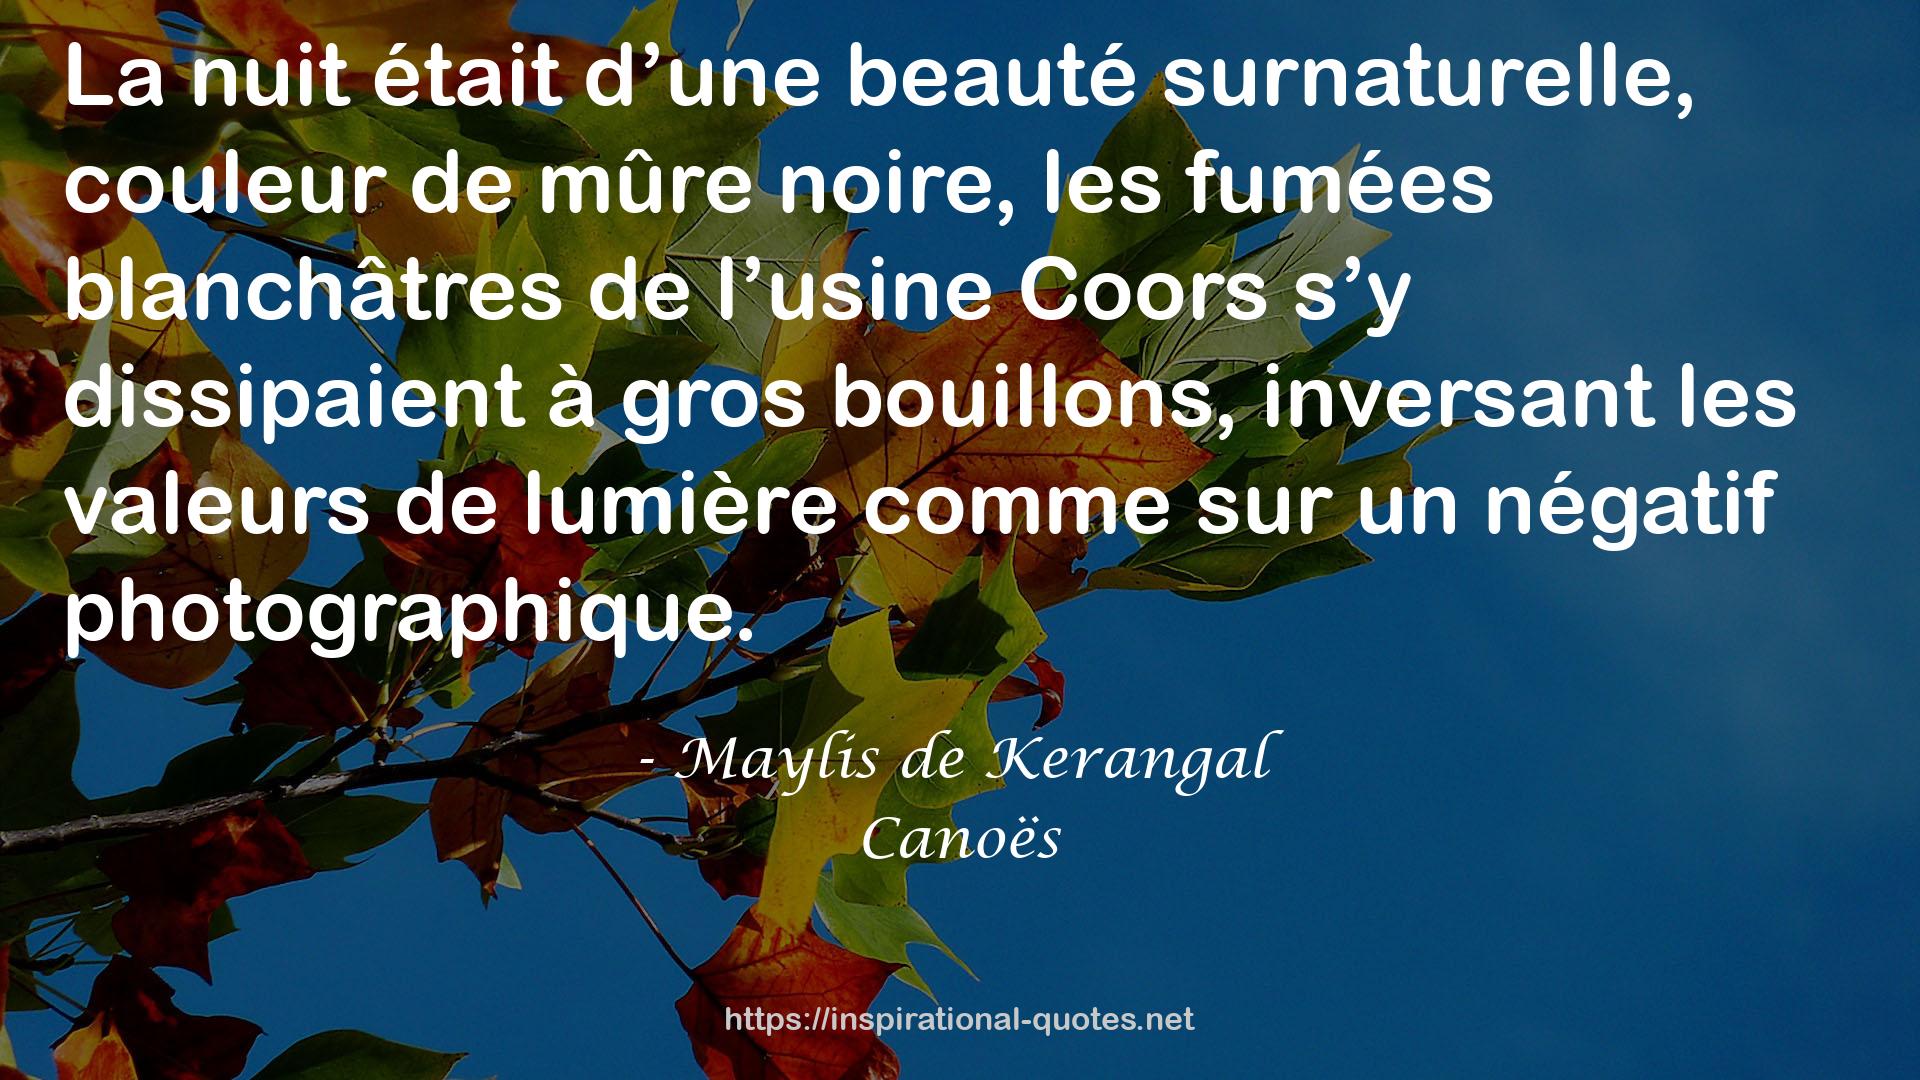 Canoës QUOTES